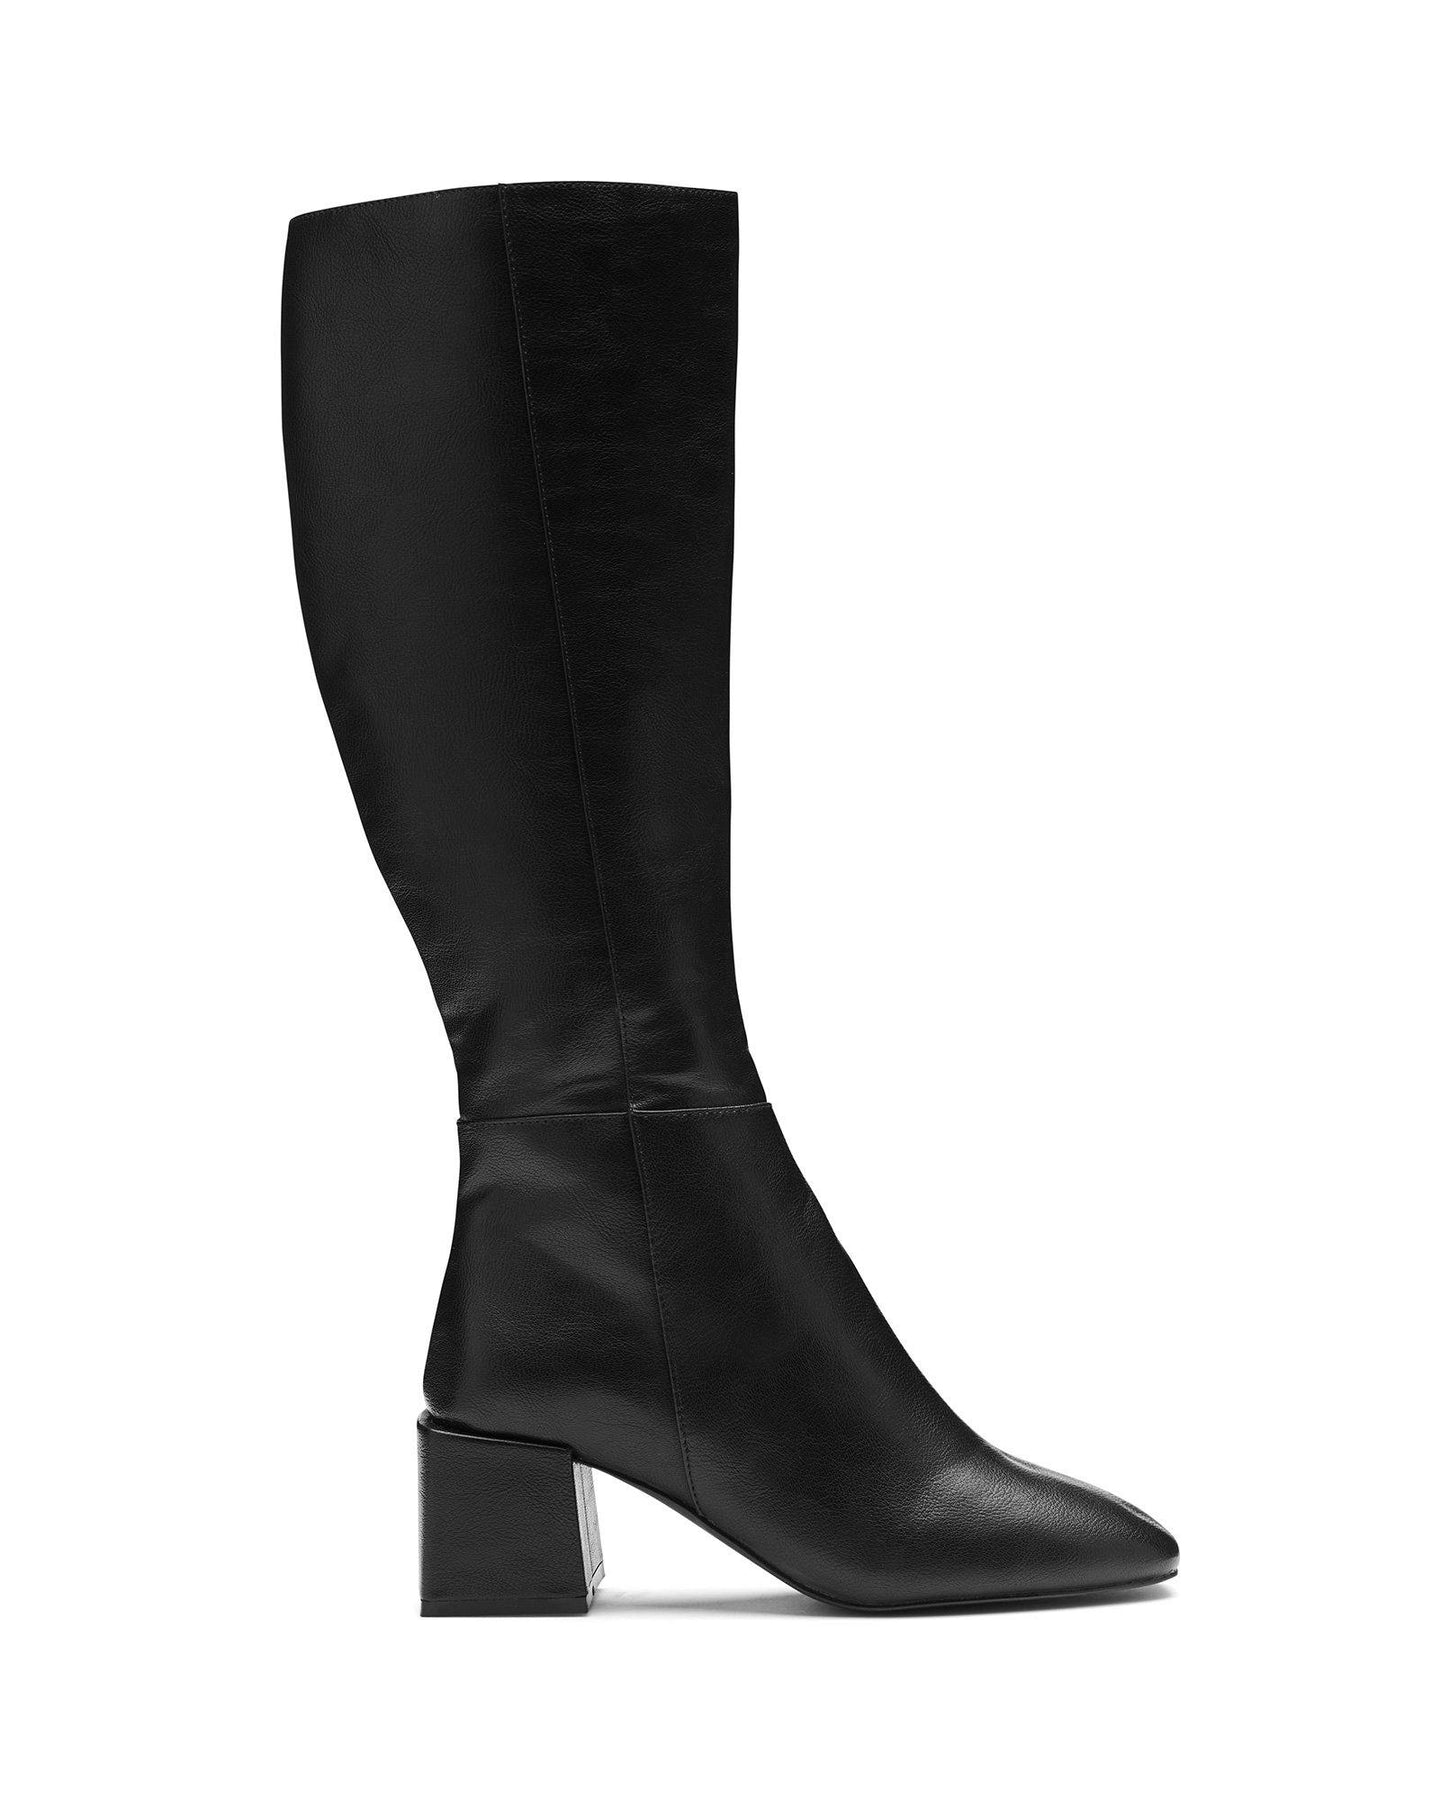 Boots | Real Leather Premium Low Heel Knee High Boot | Warehouse | Knee  high leather boots, Boots, Shoe boots